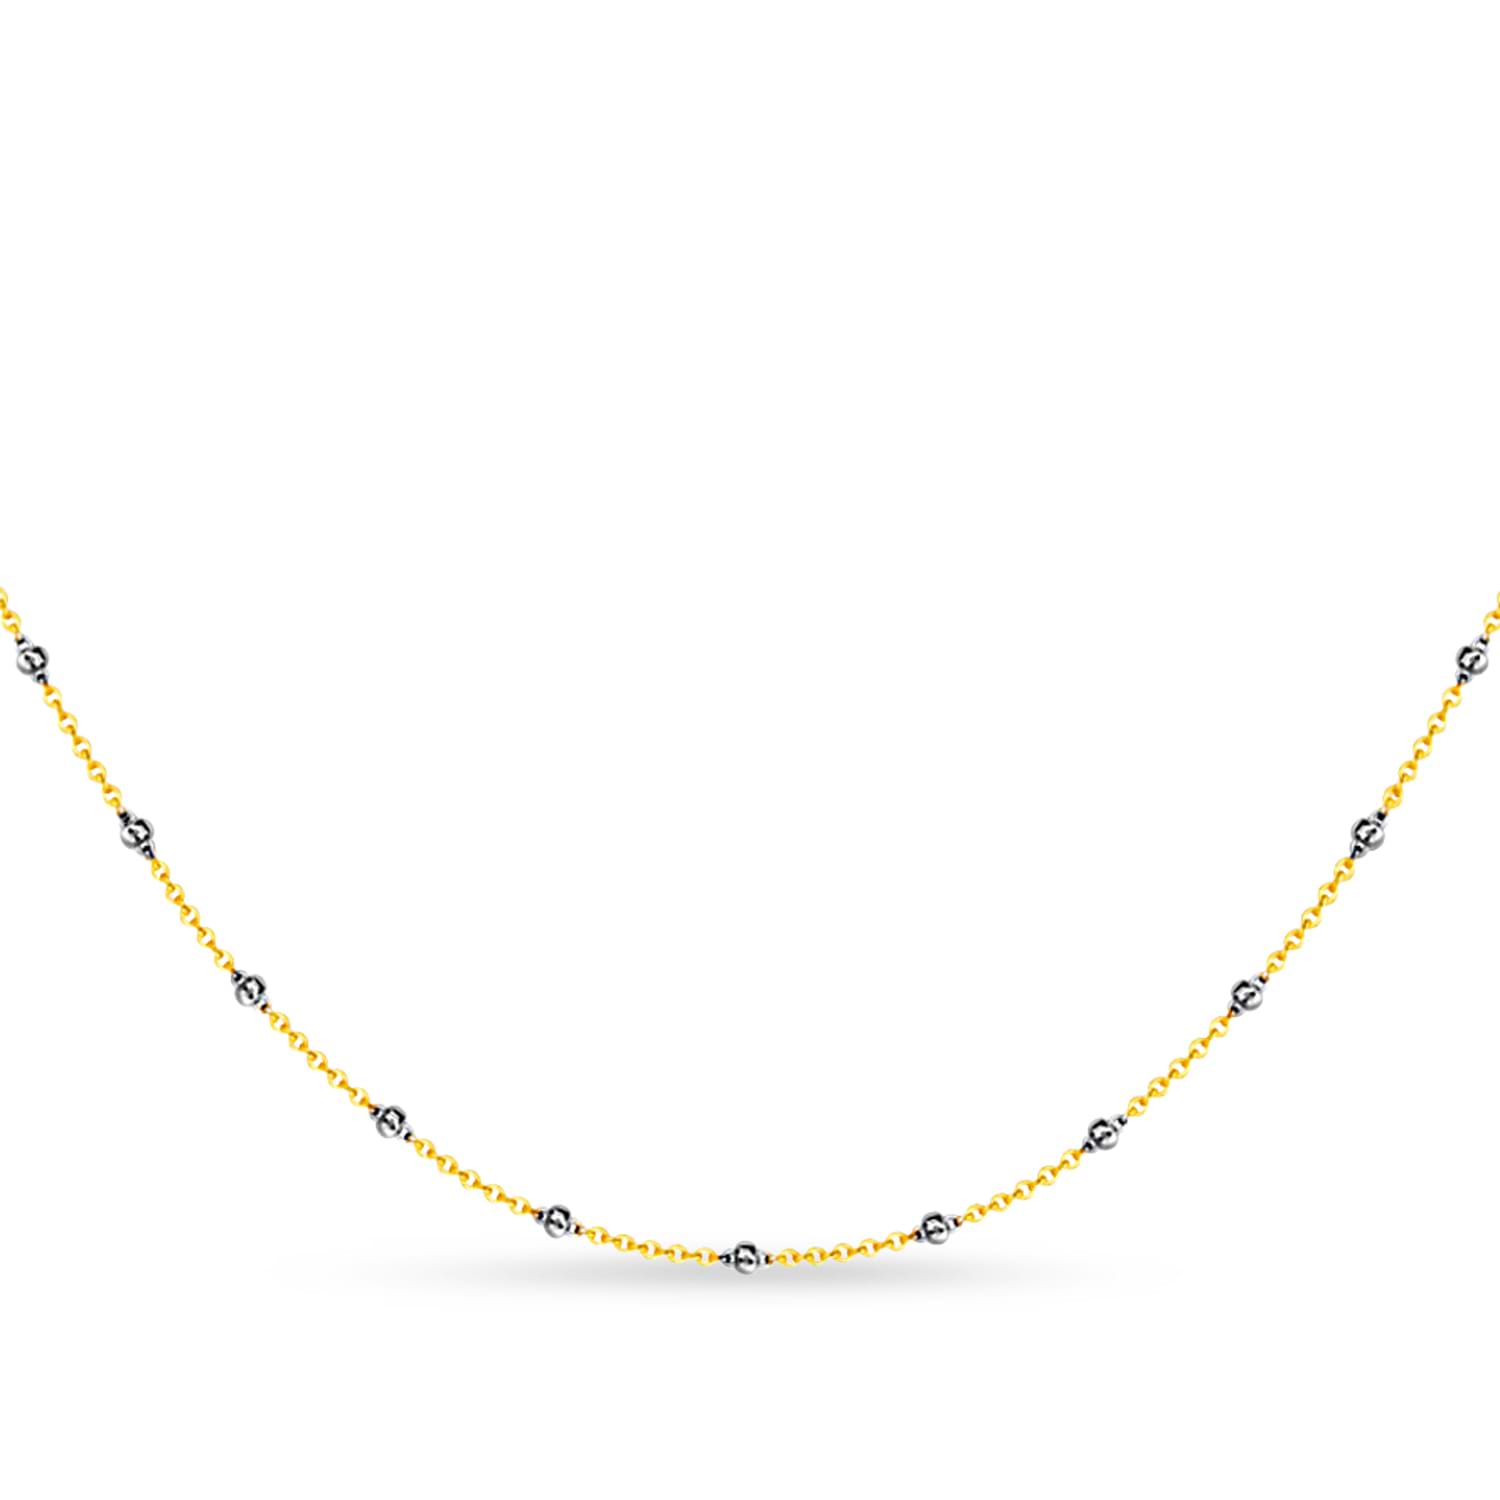 Cable Chain Necklace With Beads 14k Yellow Gold